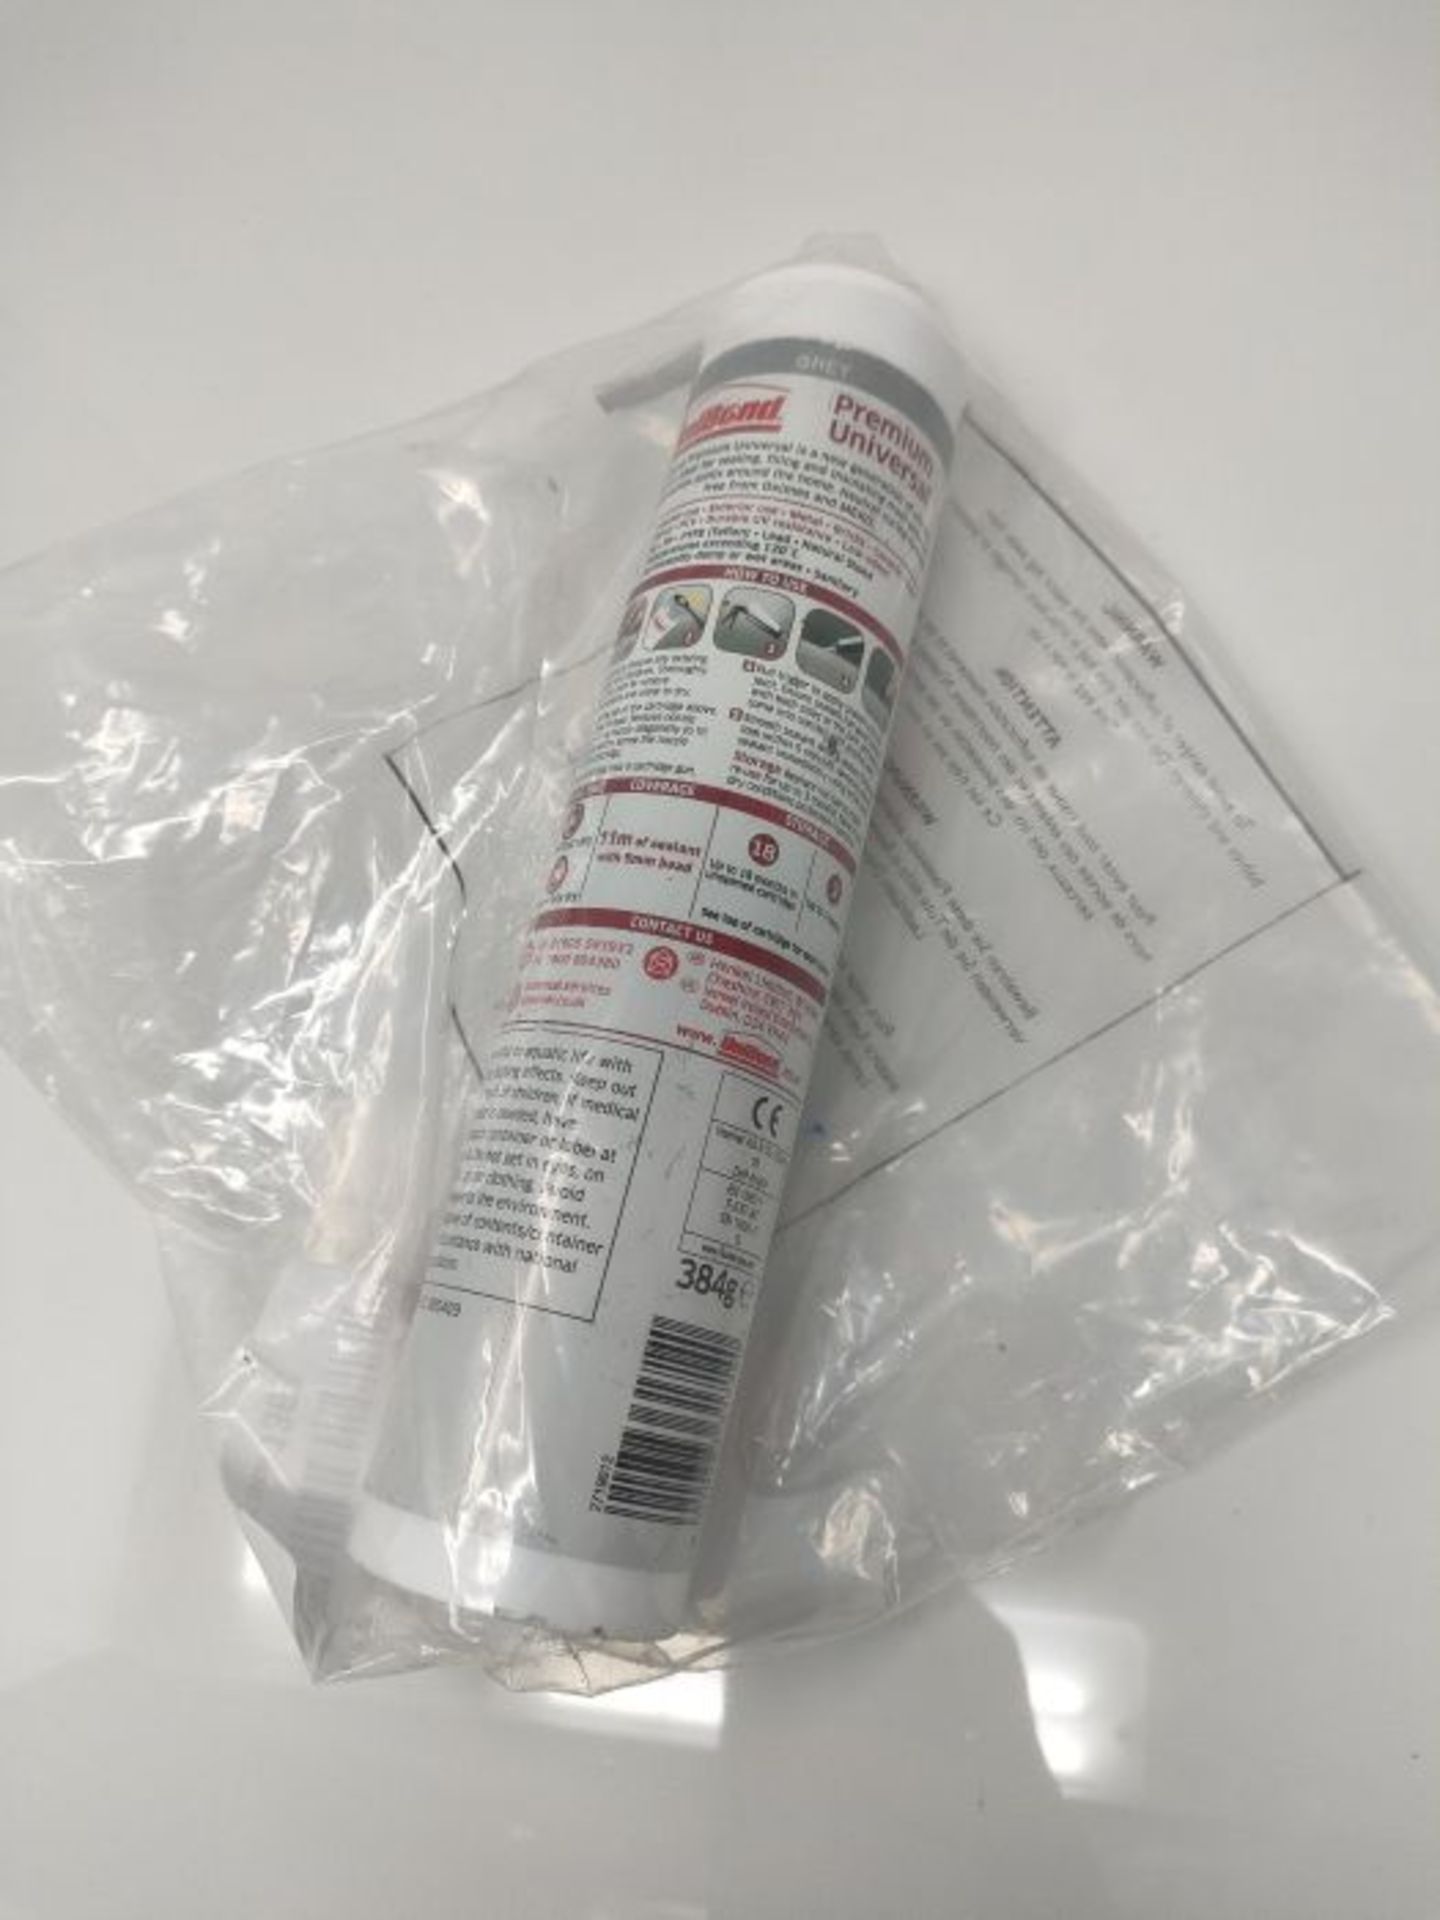 [INCOMPLETE] UniBond 2254877 Sealant Neutral Grey, 384g - Image 3 of 3